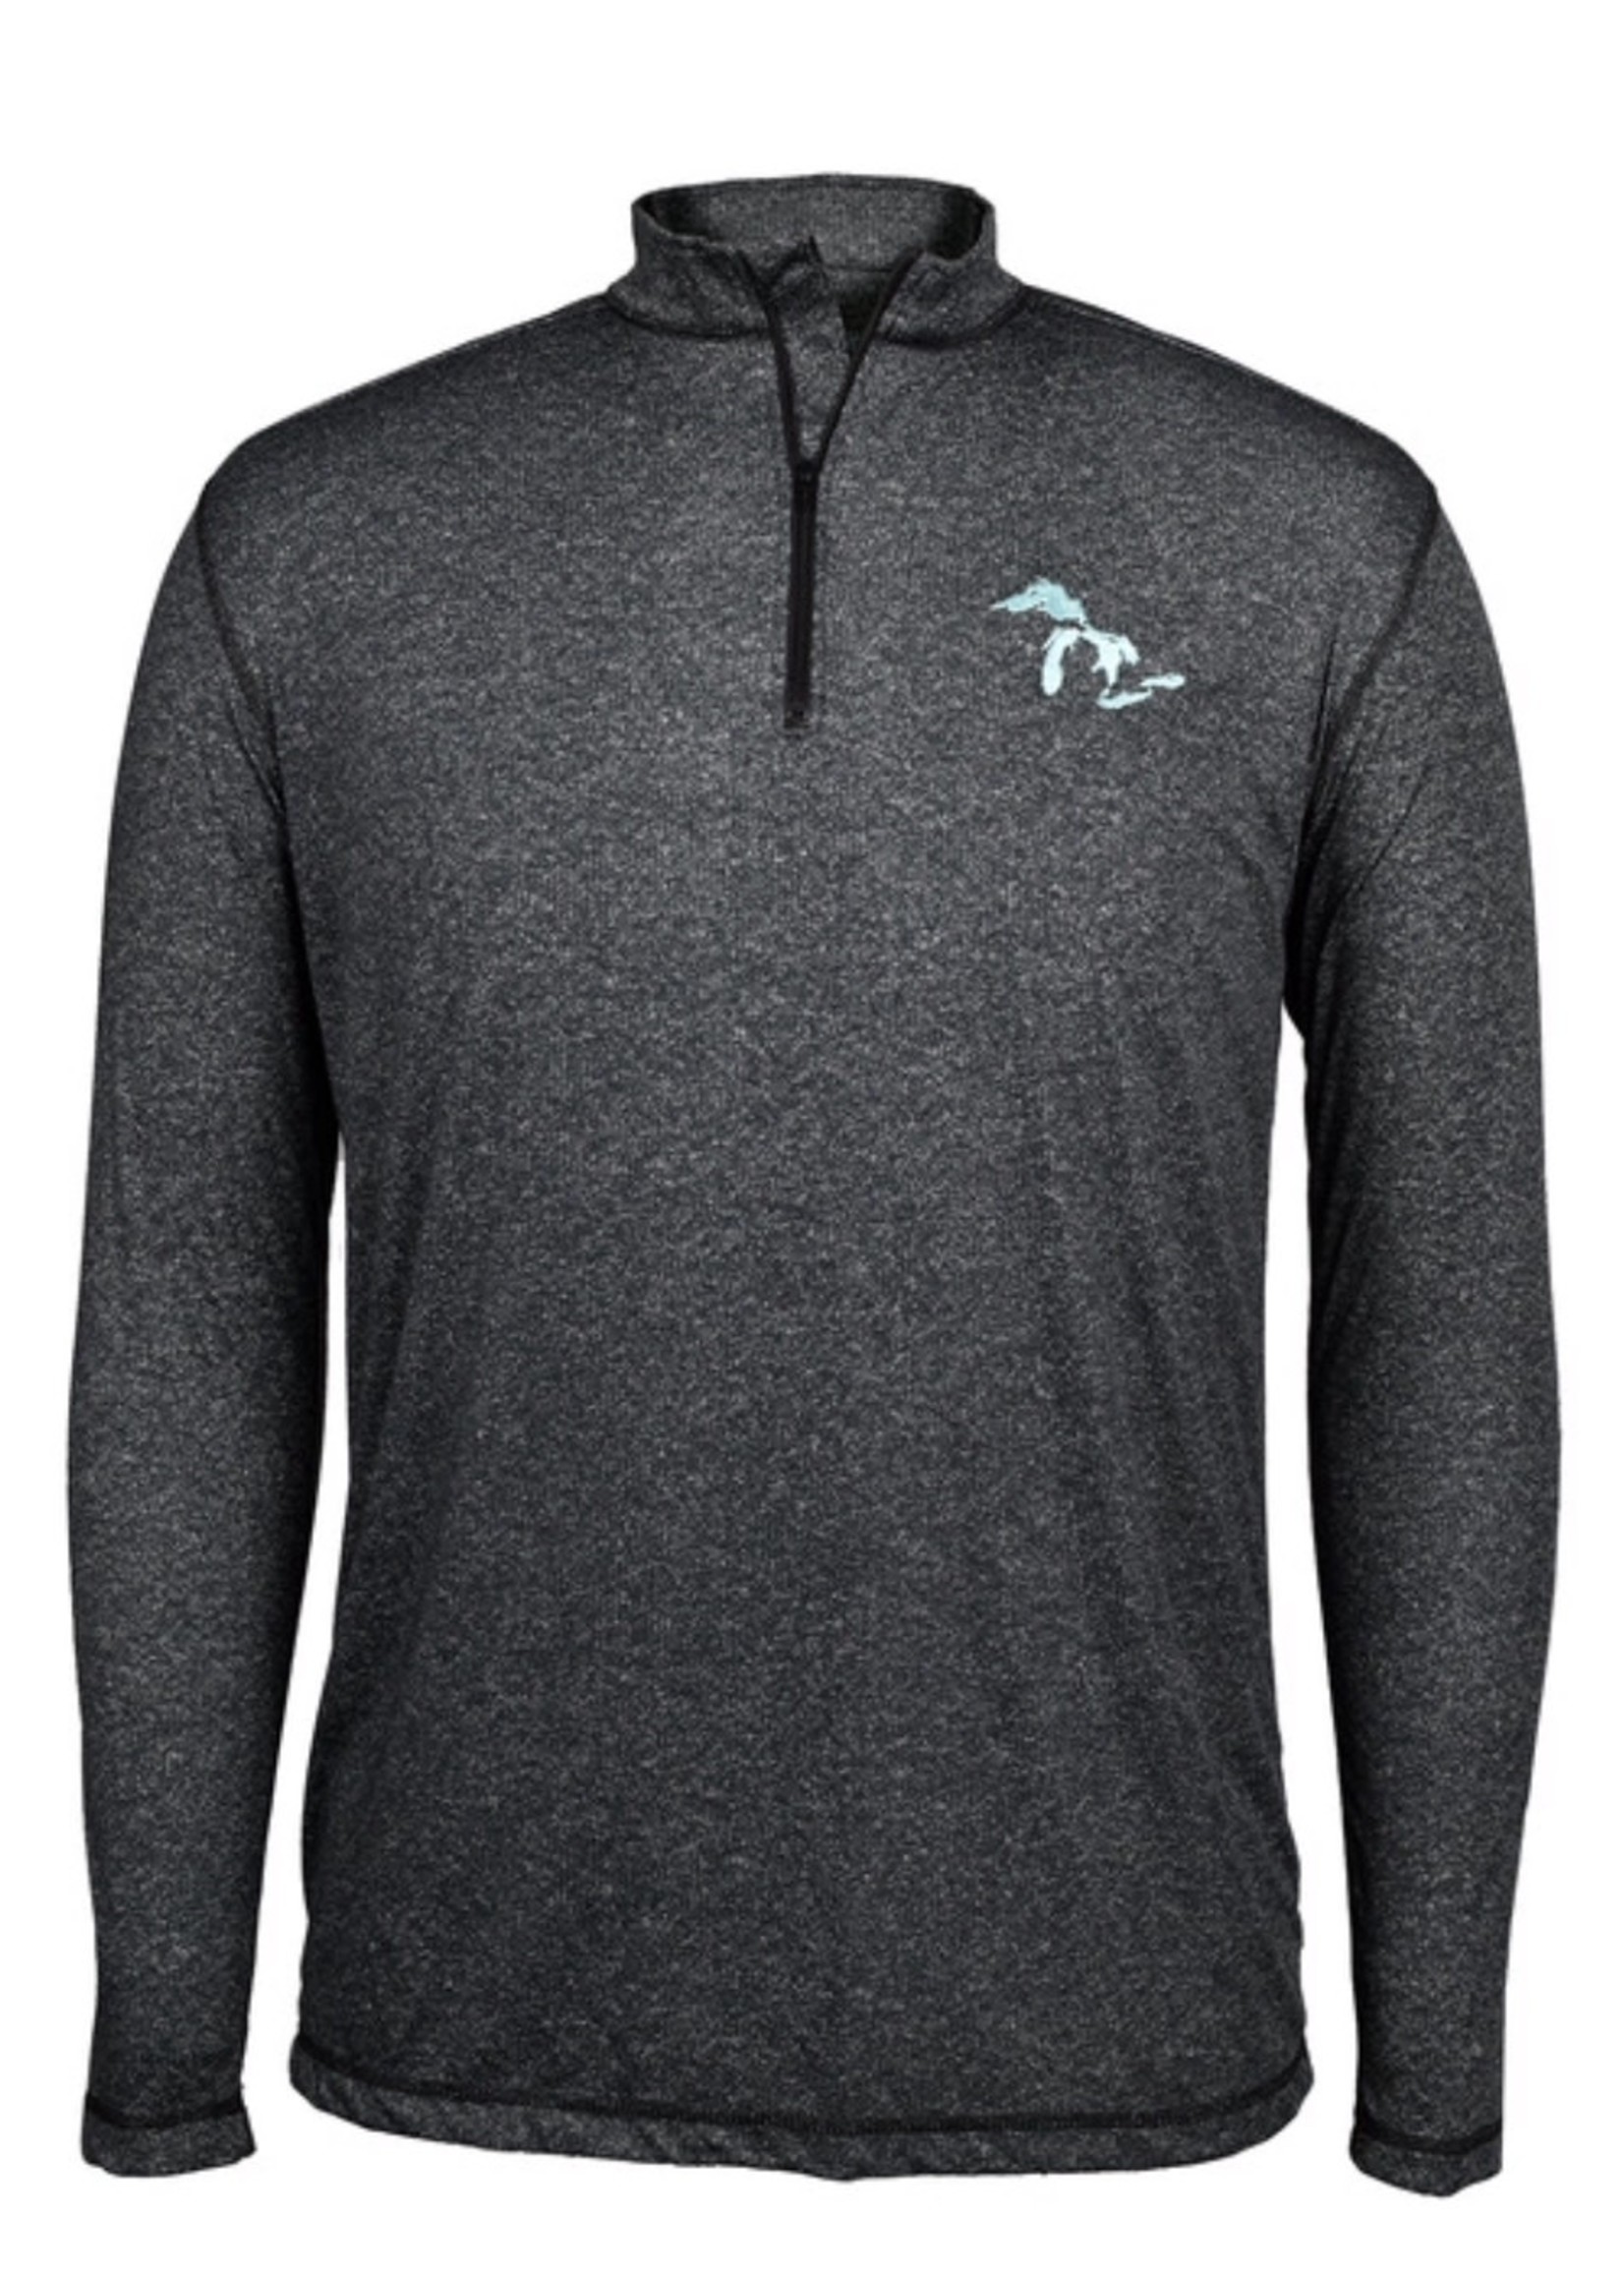 Embroidered Lakes 1/4 Zip